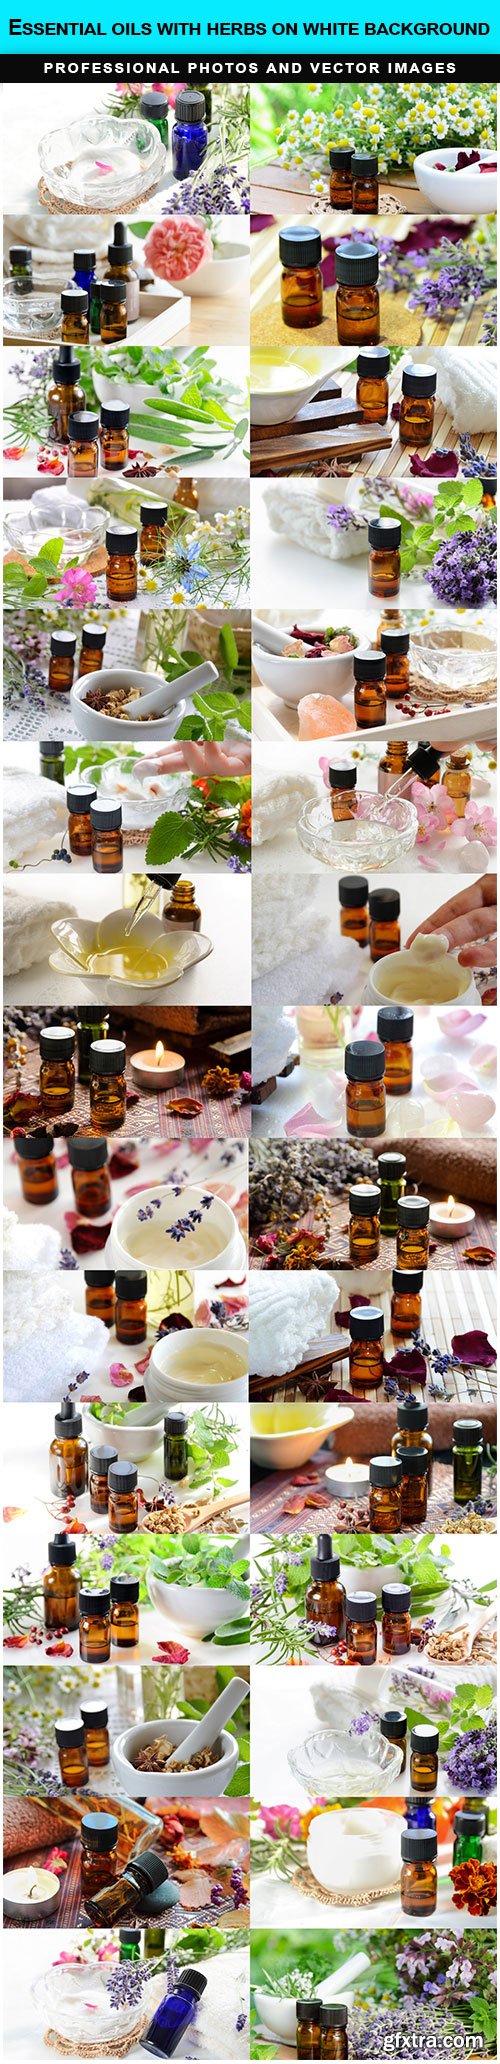 Essential oils with herbs on white background